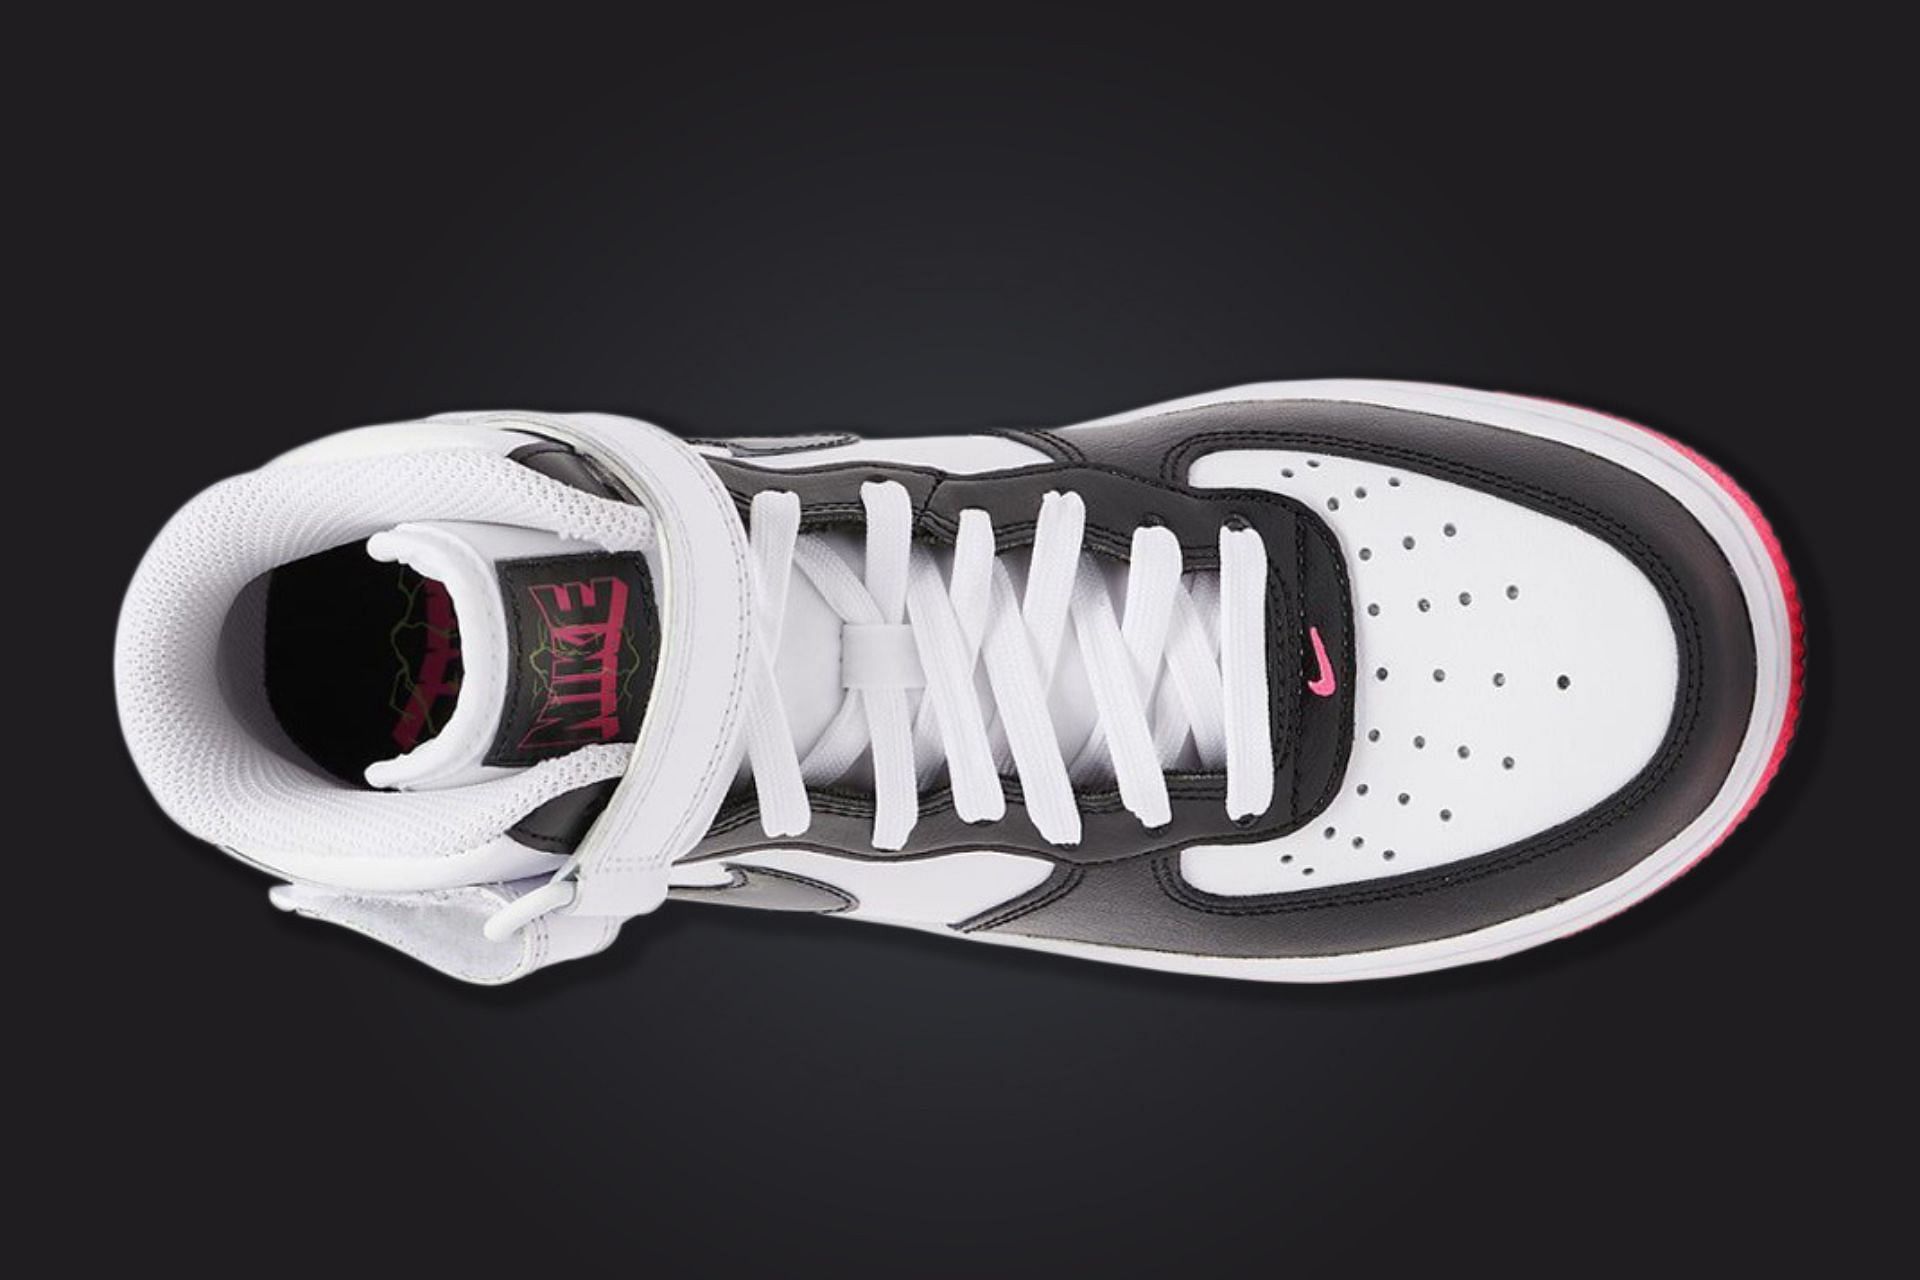 Take a look at the uppers of these sneakers (Image via Nike)